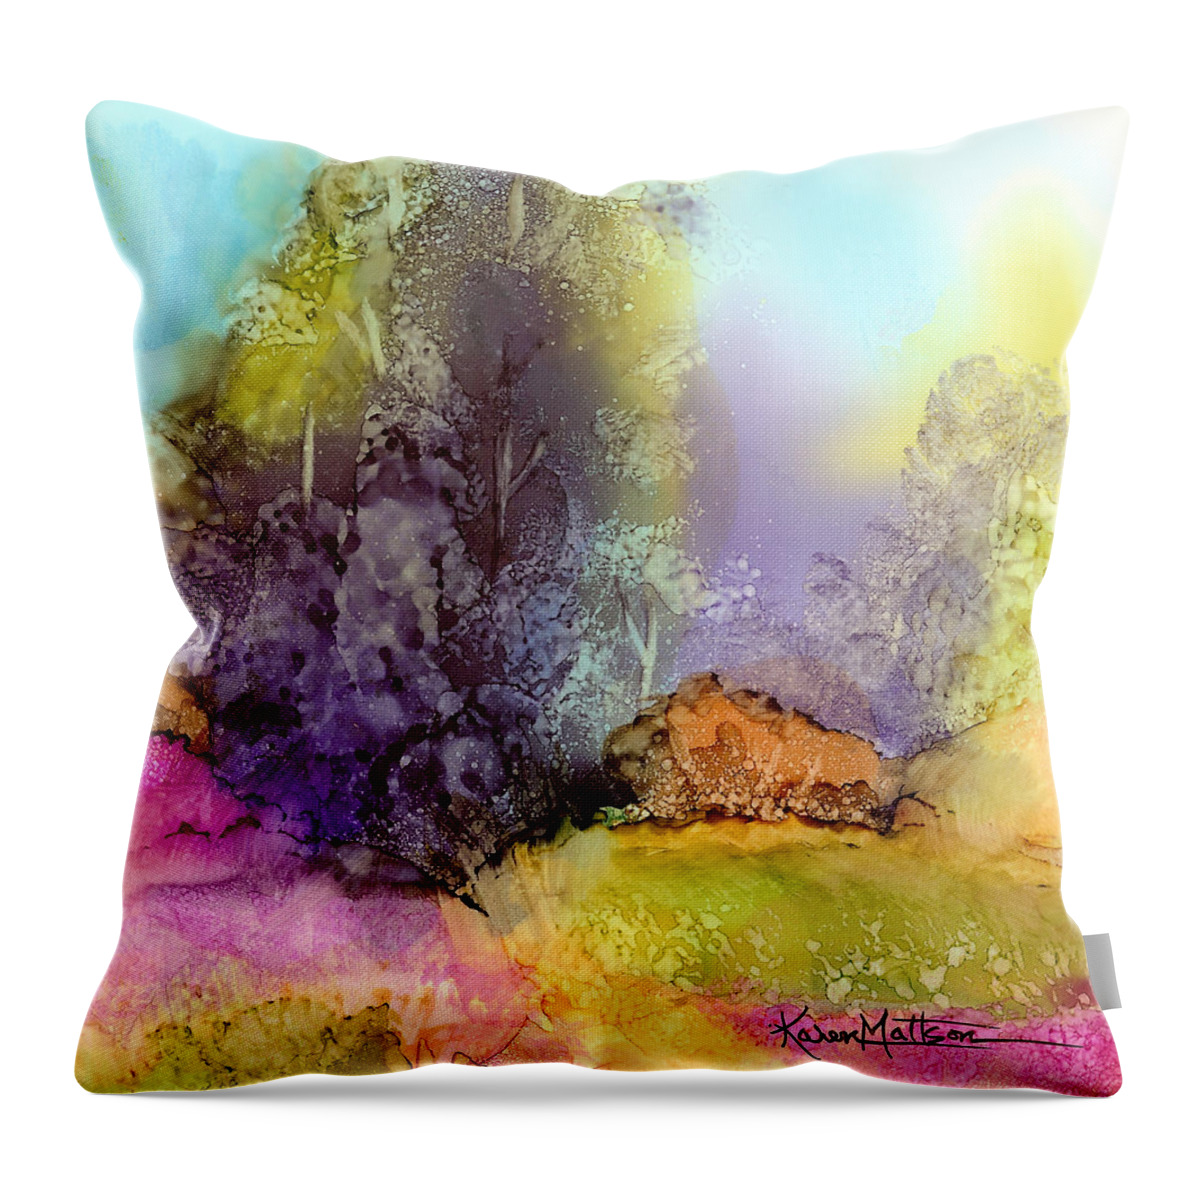 Nature Throw Pillow featuring the painting The Purple Tree by Karen Mattson